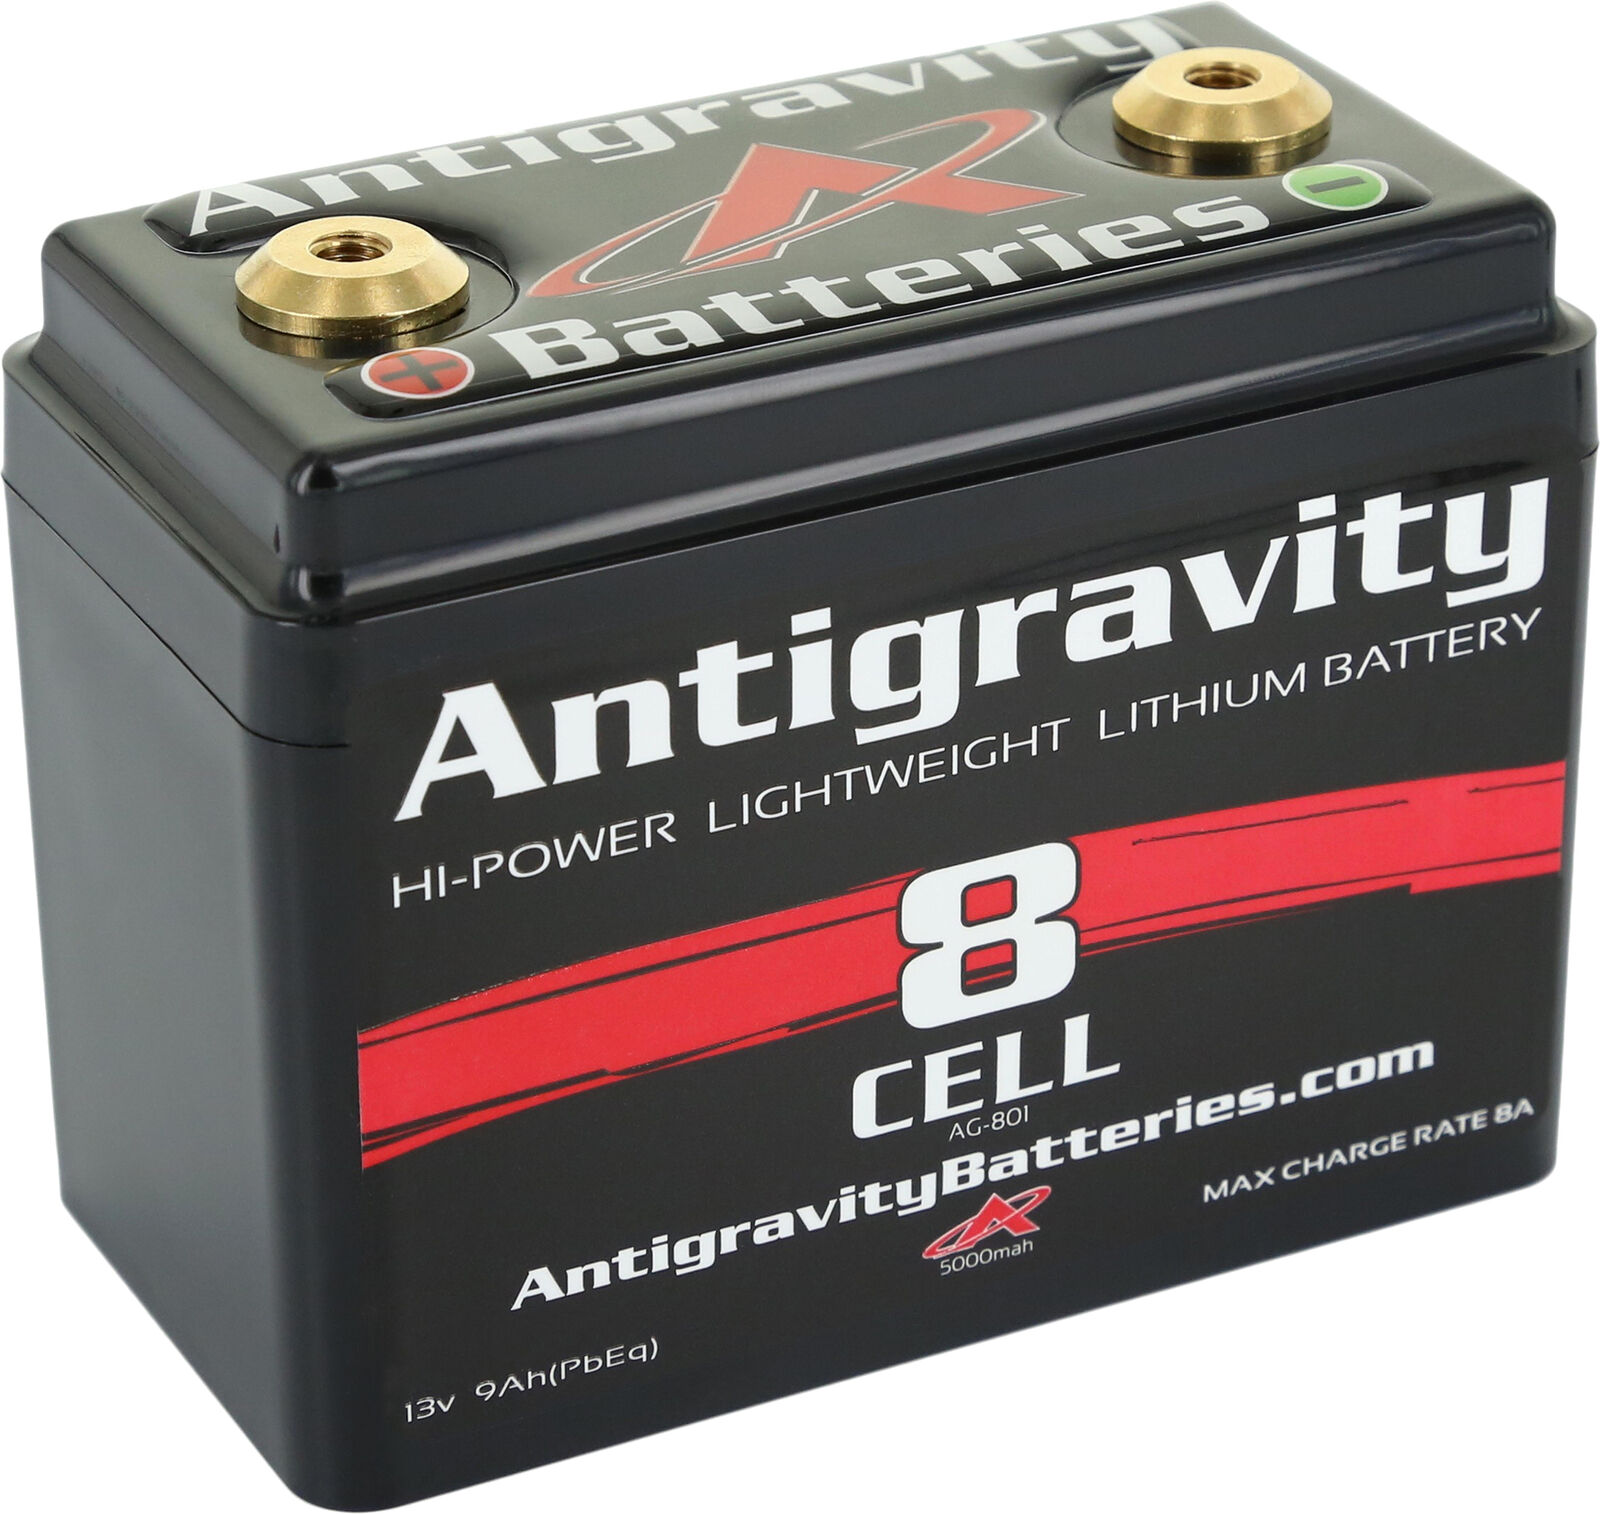 Small Case Lithium Ion Battery AG-801 240 CA Antigravity